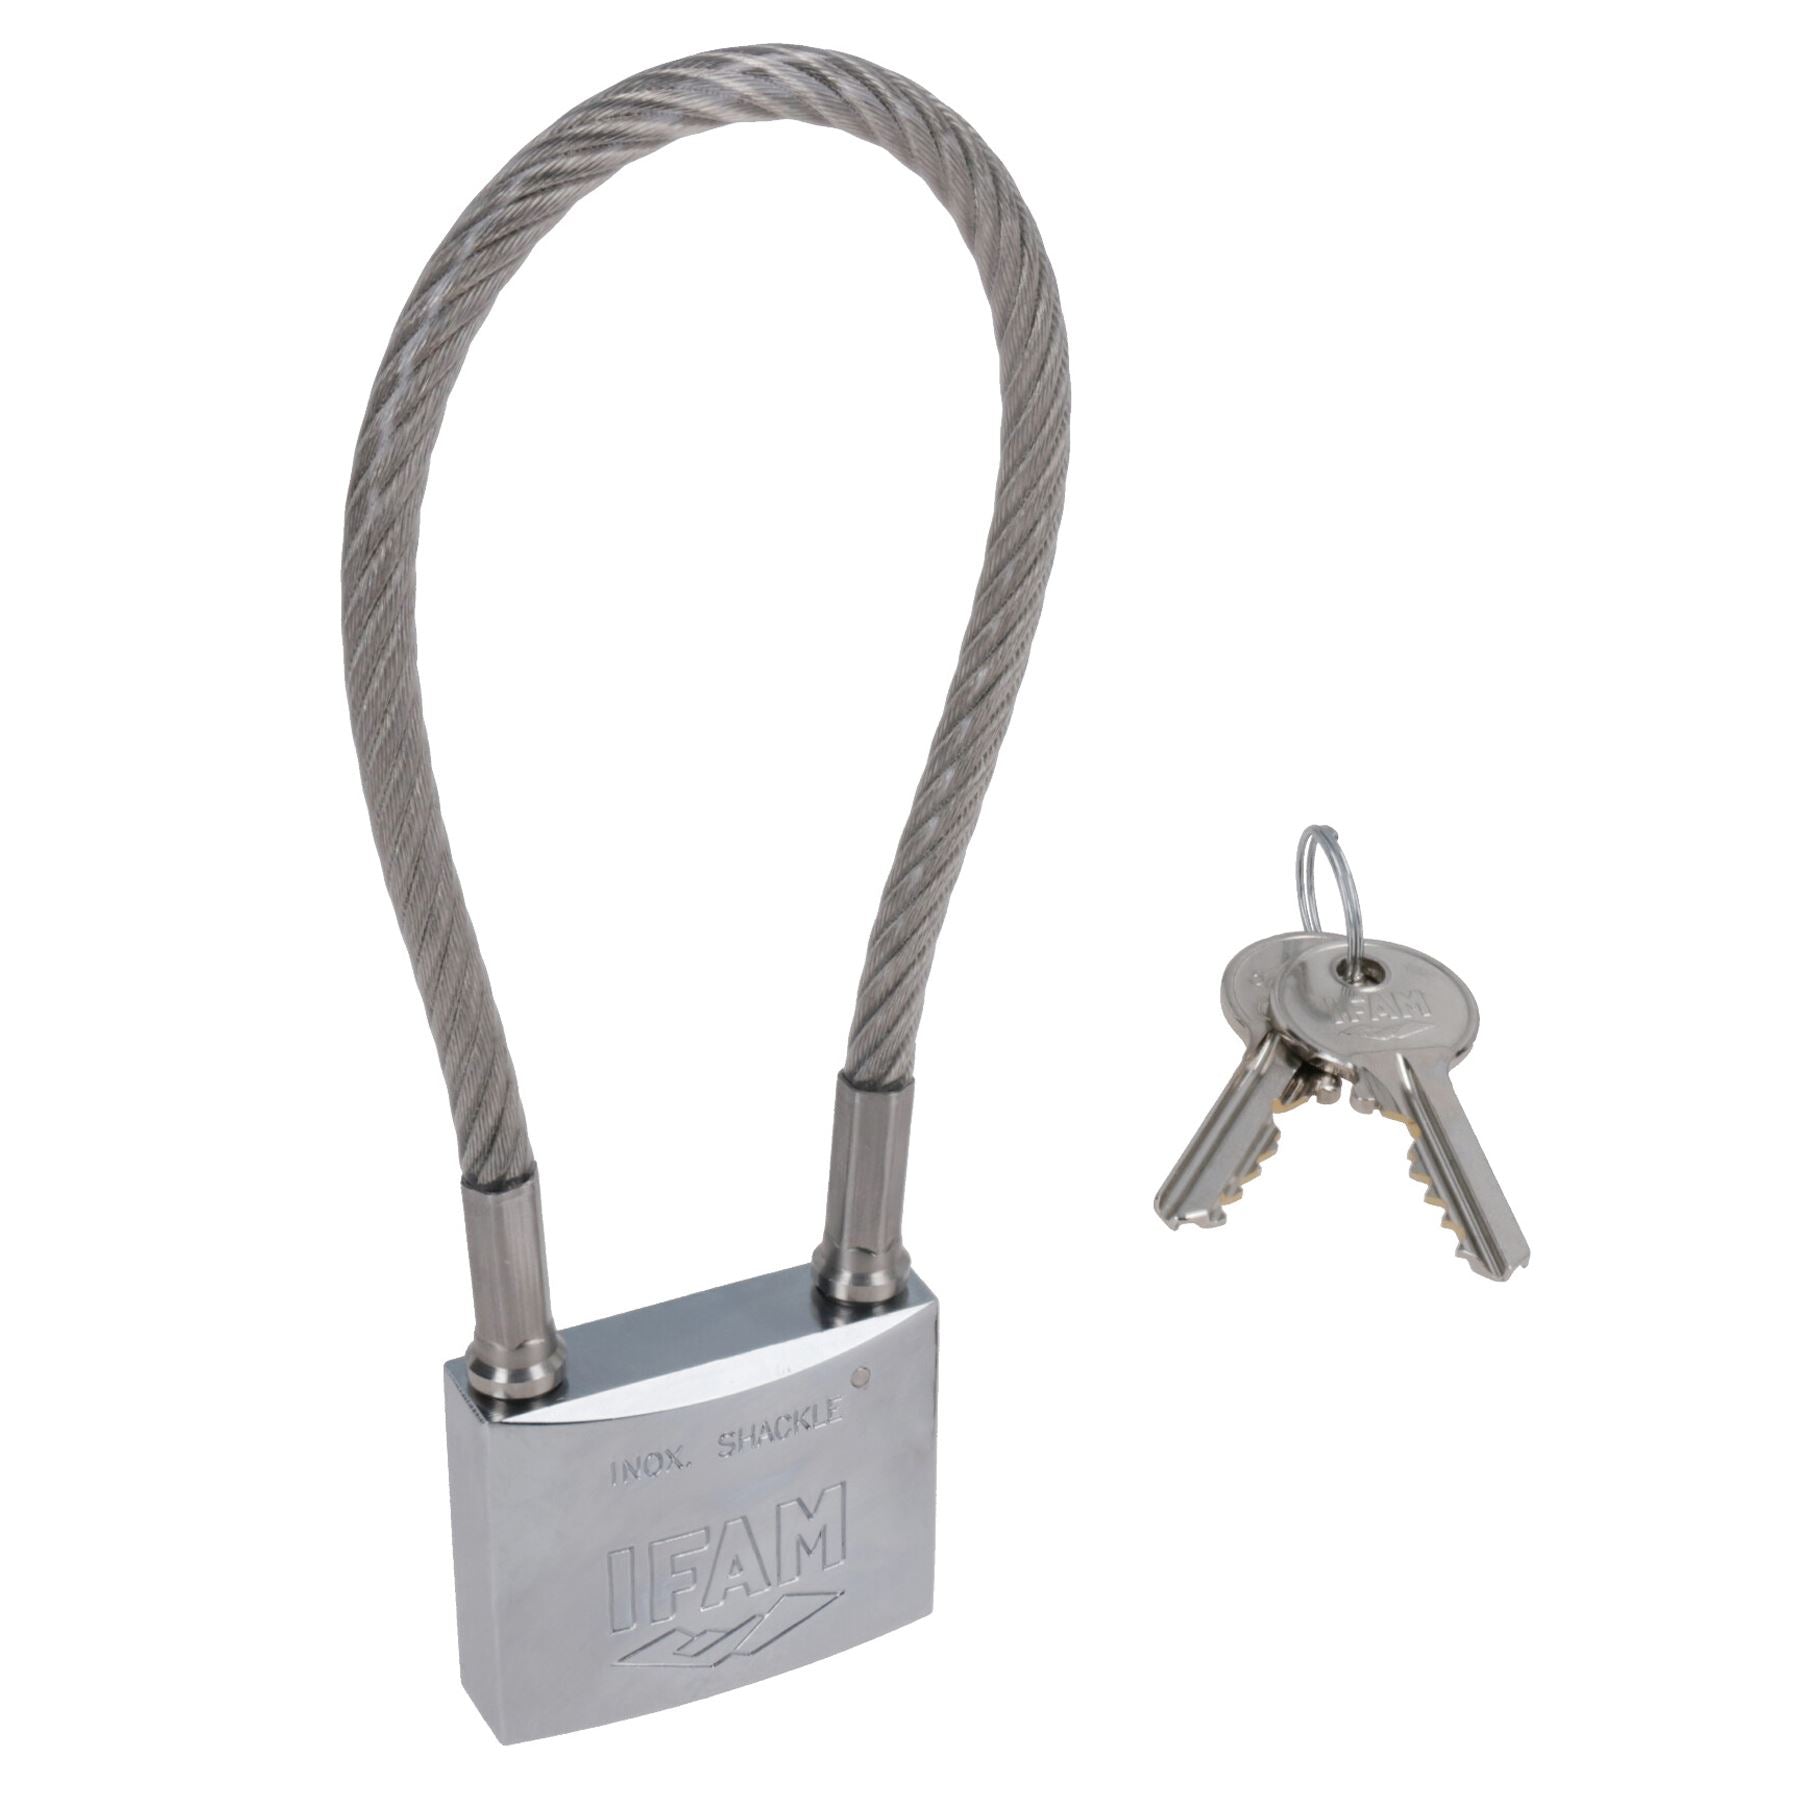 50mm Marine Cable Padlock Stainless Steel Shackle Rust Proof Boat Yacht